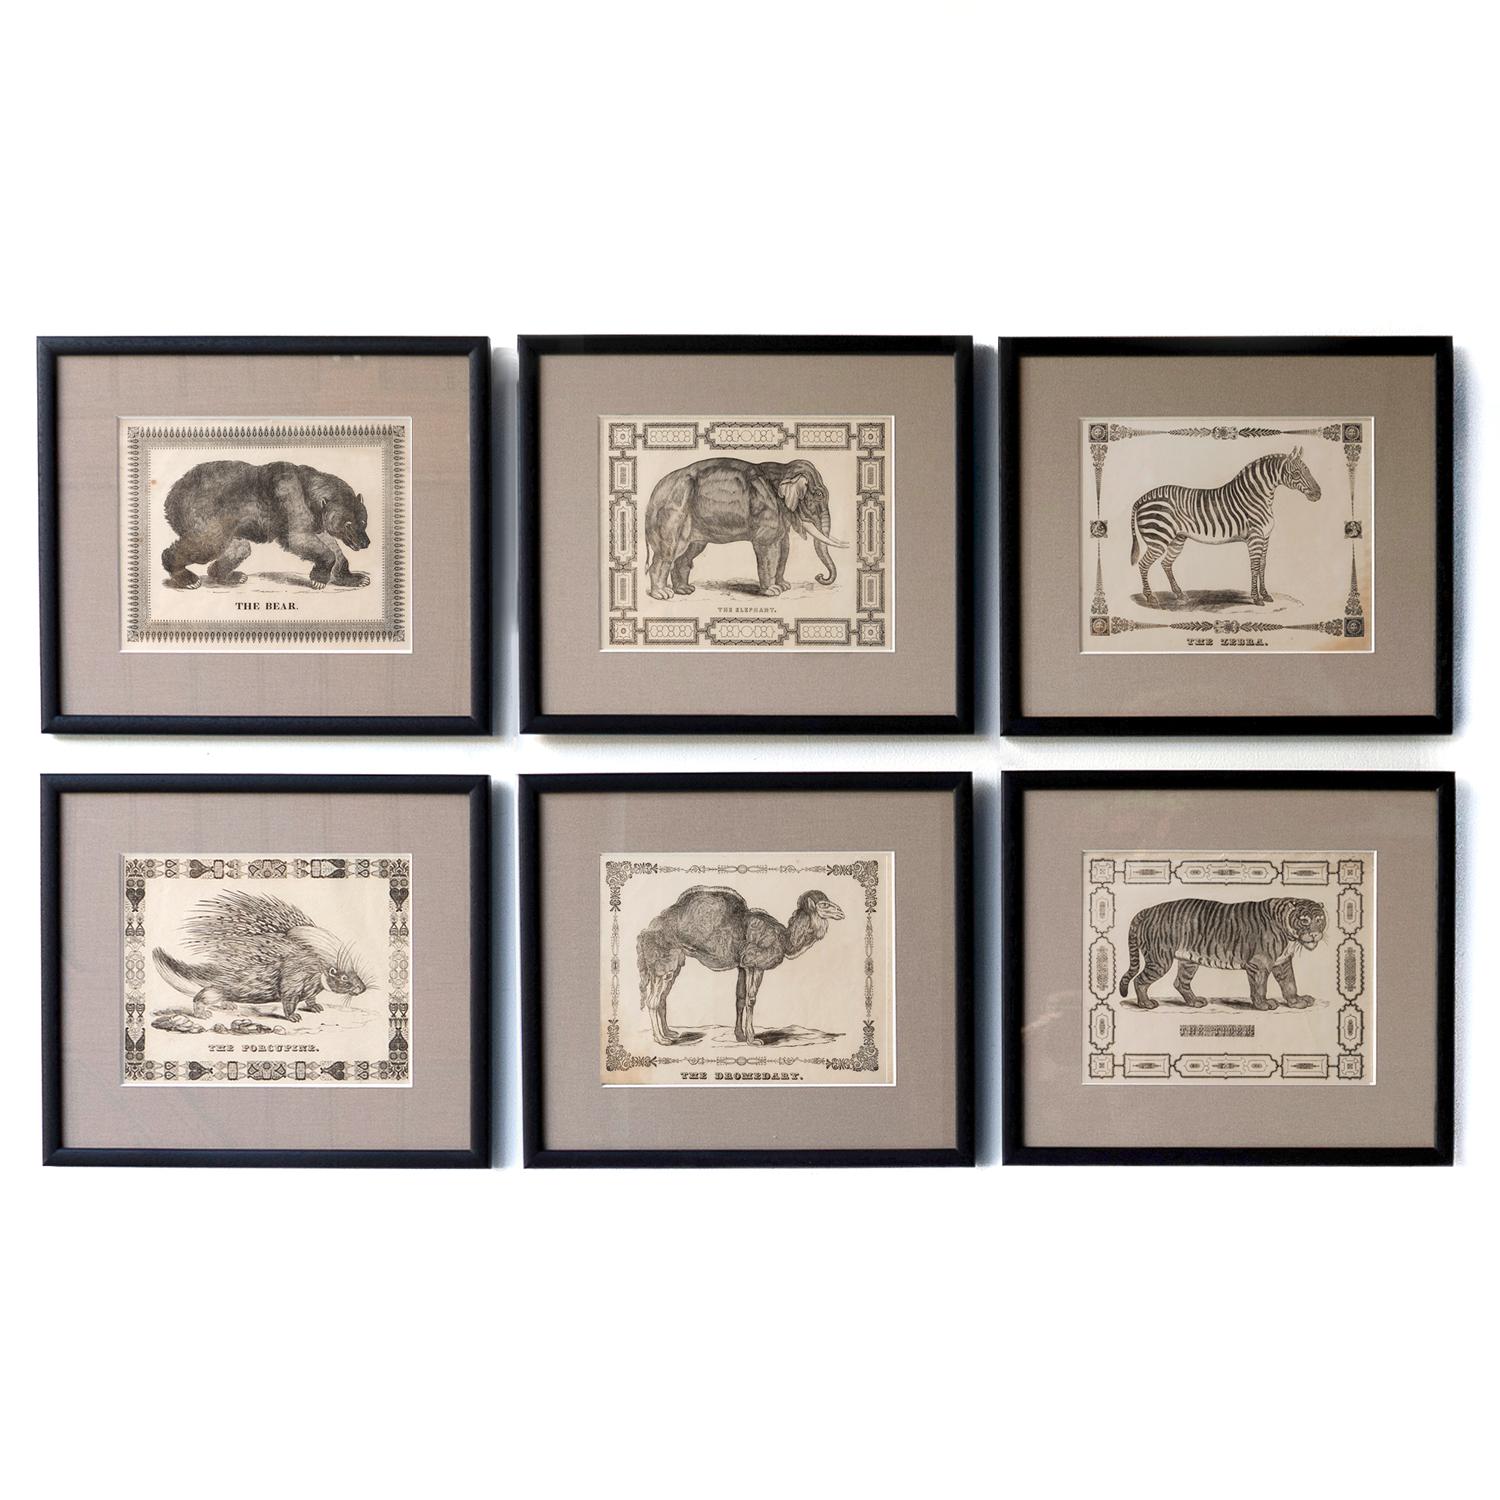 FRAMED WOODCUT ENGRAVINGS 
Depicting a Tiger, Zebra, Bear, Porcupine, Dromedary and an Elephant. Each with a title in a different typeface and each with a different fancy border. 

Originally taken from a single contact sheet from a catalogue of